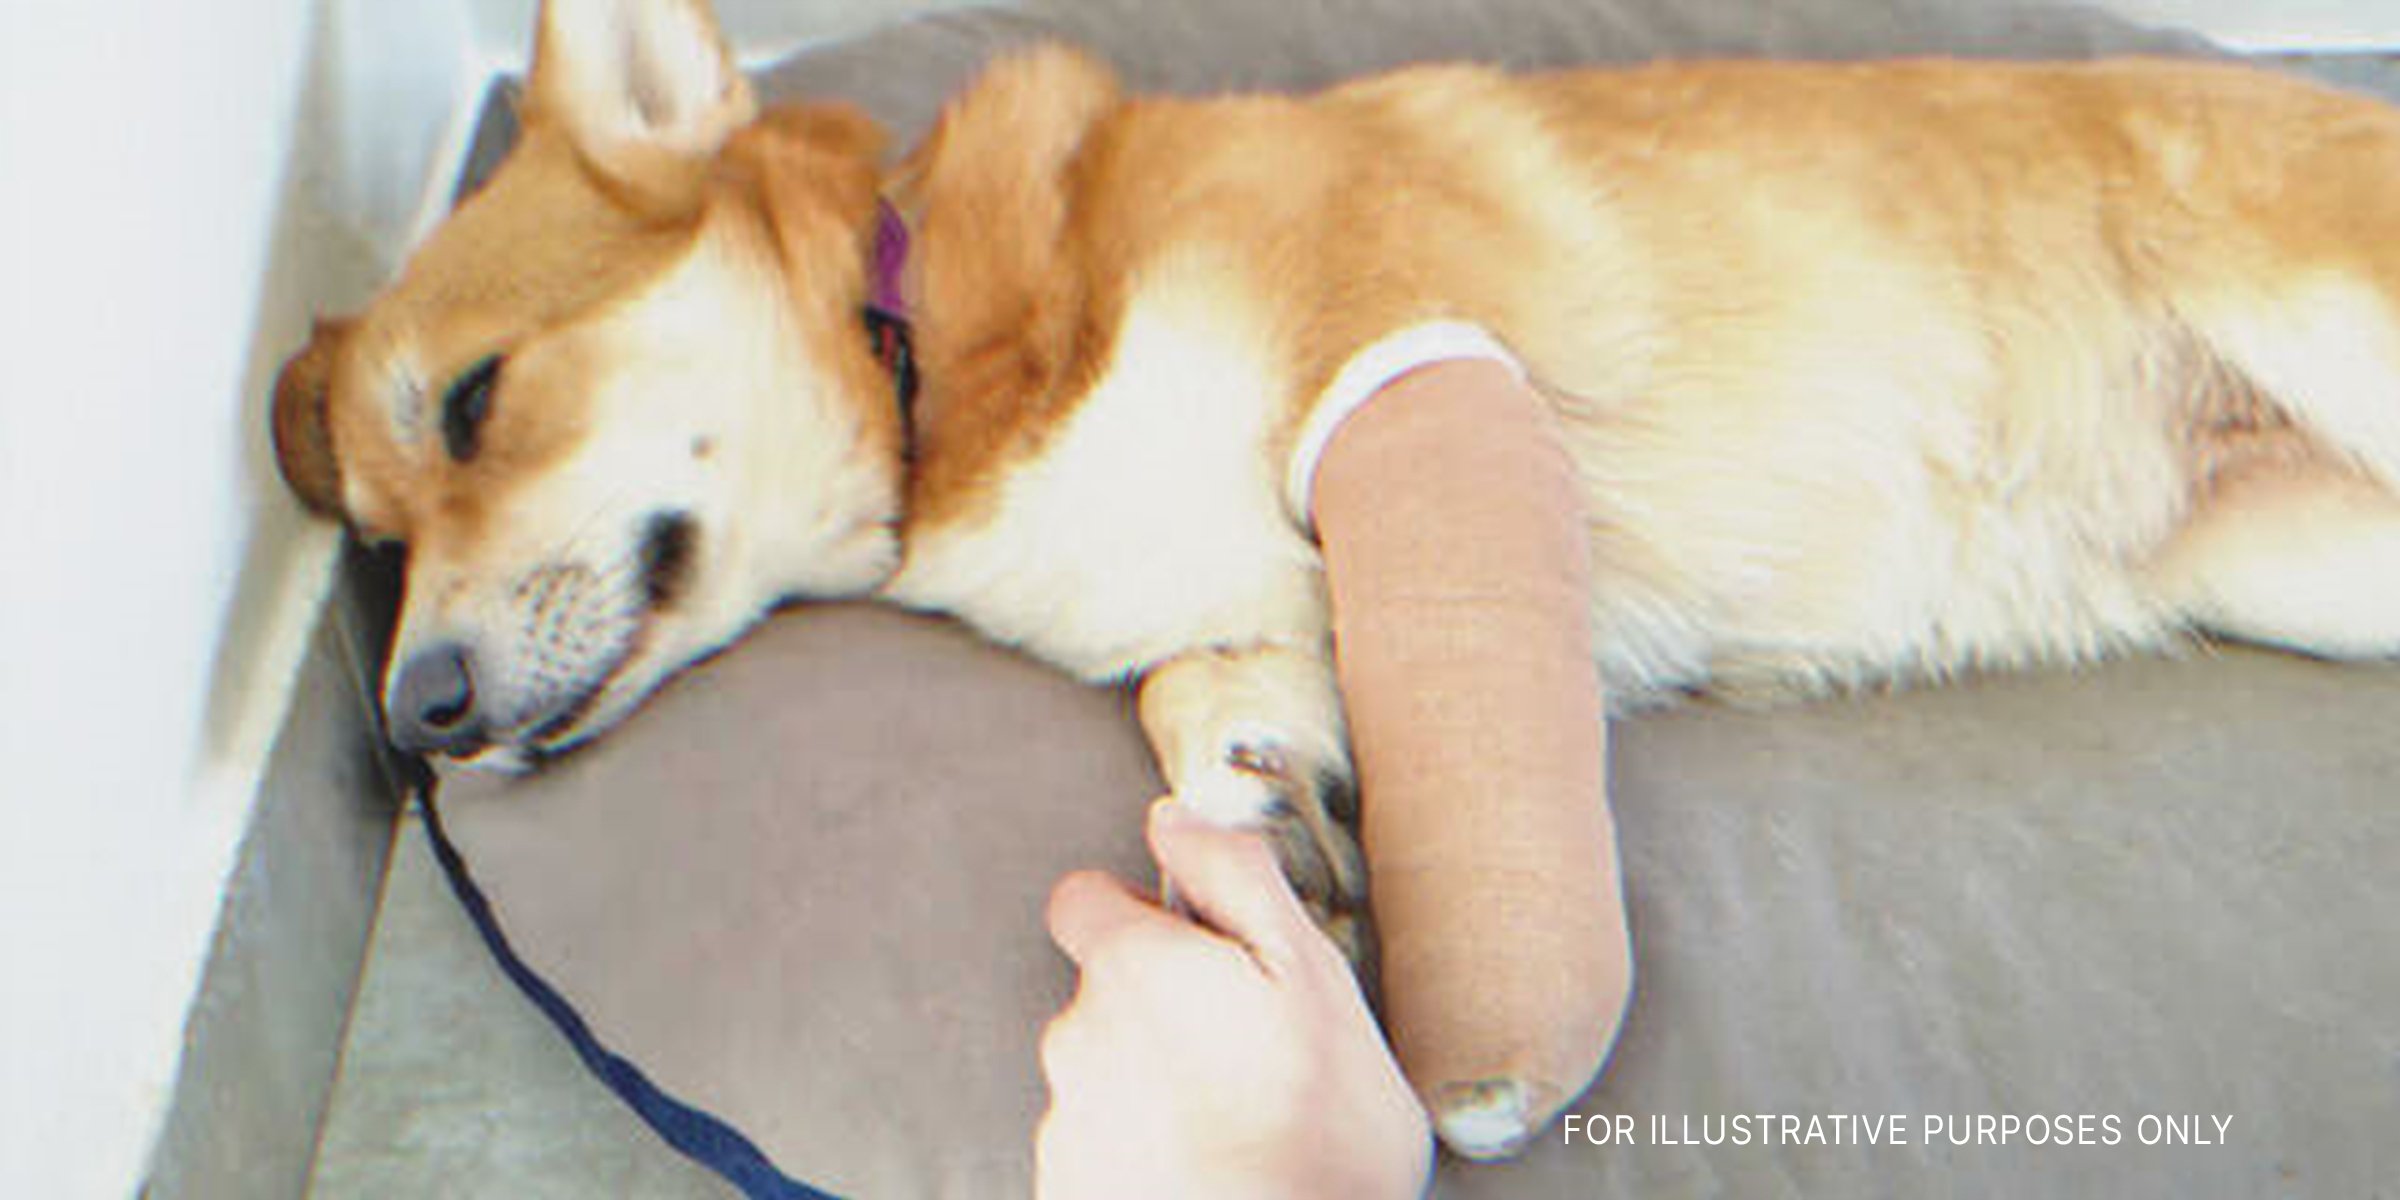 Dog with bandaged paw lying on blanket | Source: Shutterstock